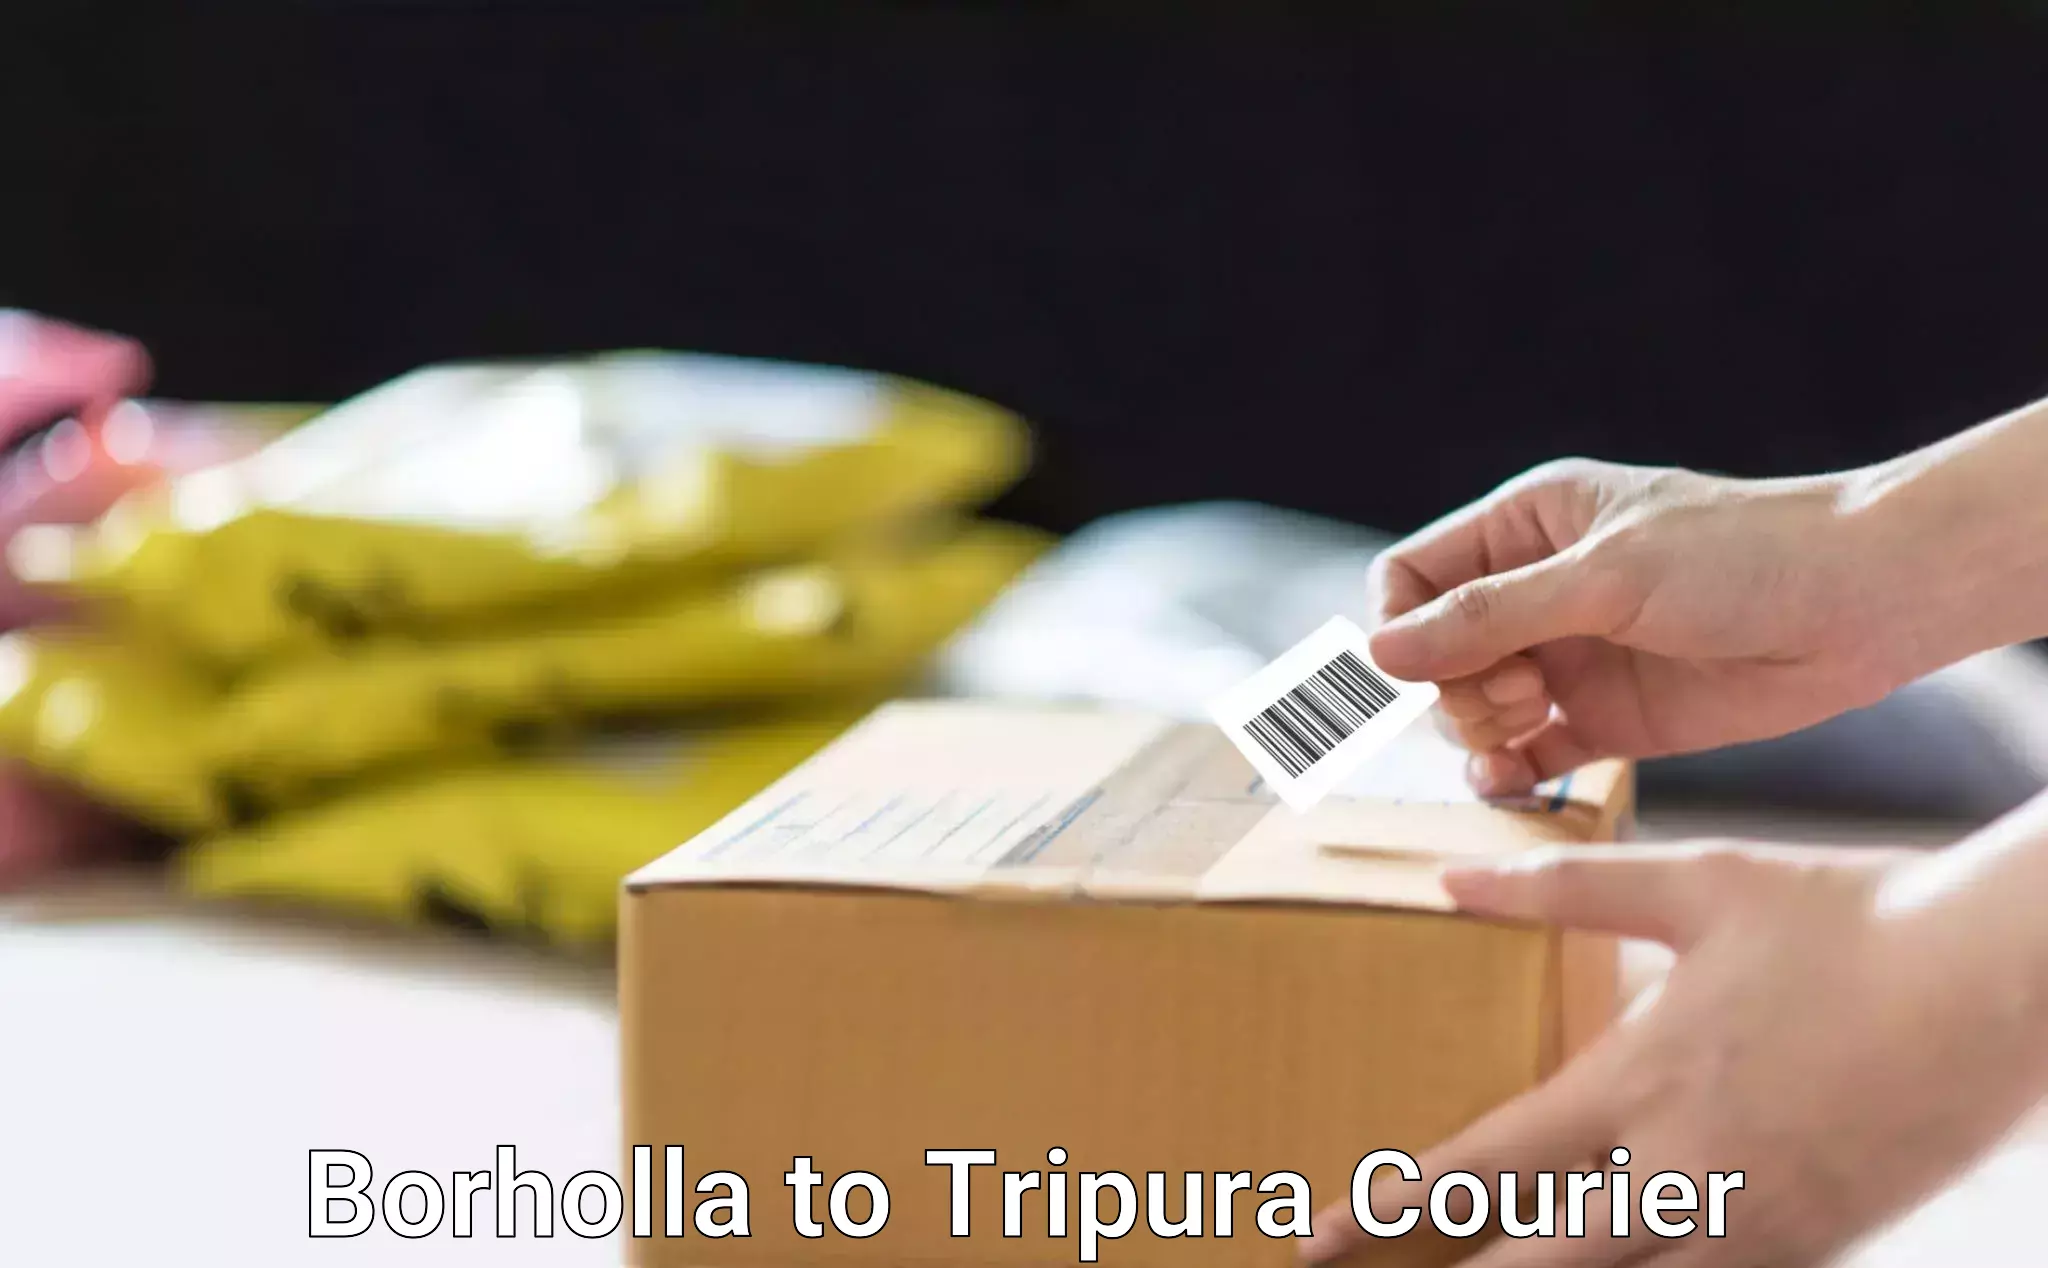 Nationwide parcel services Borholla to Tripura